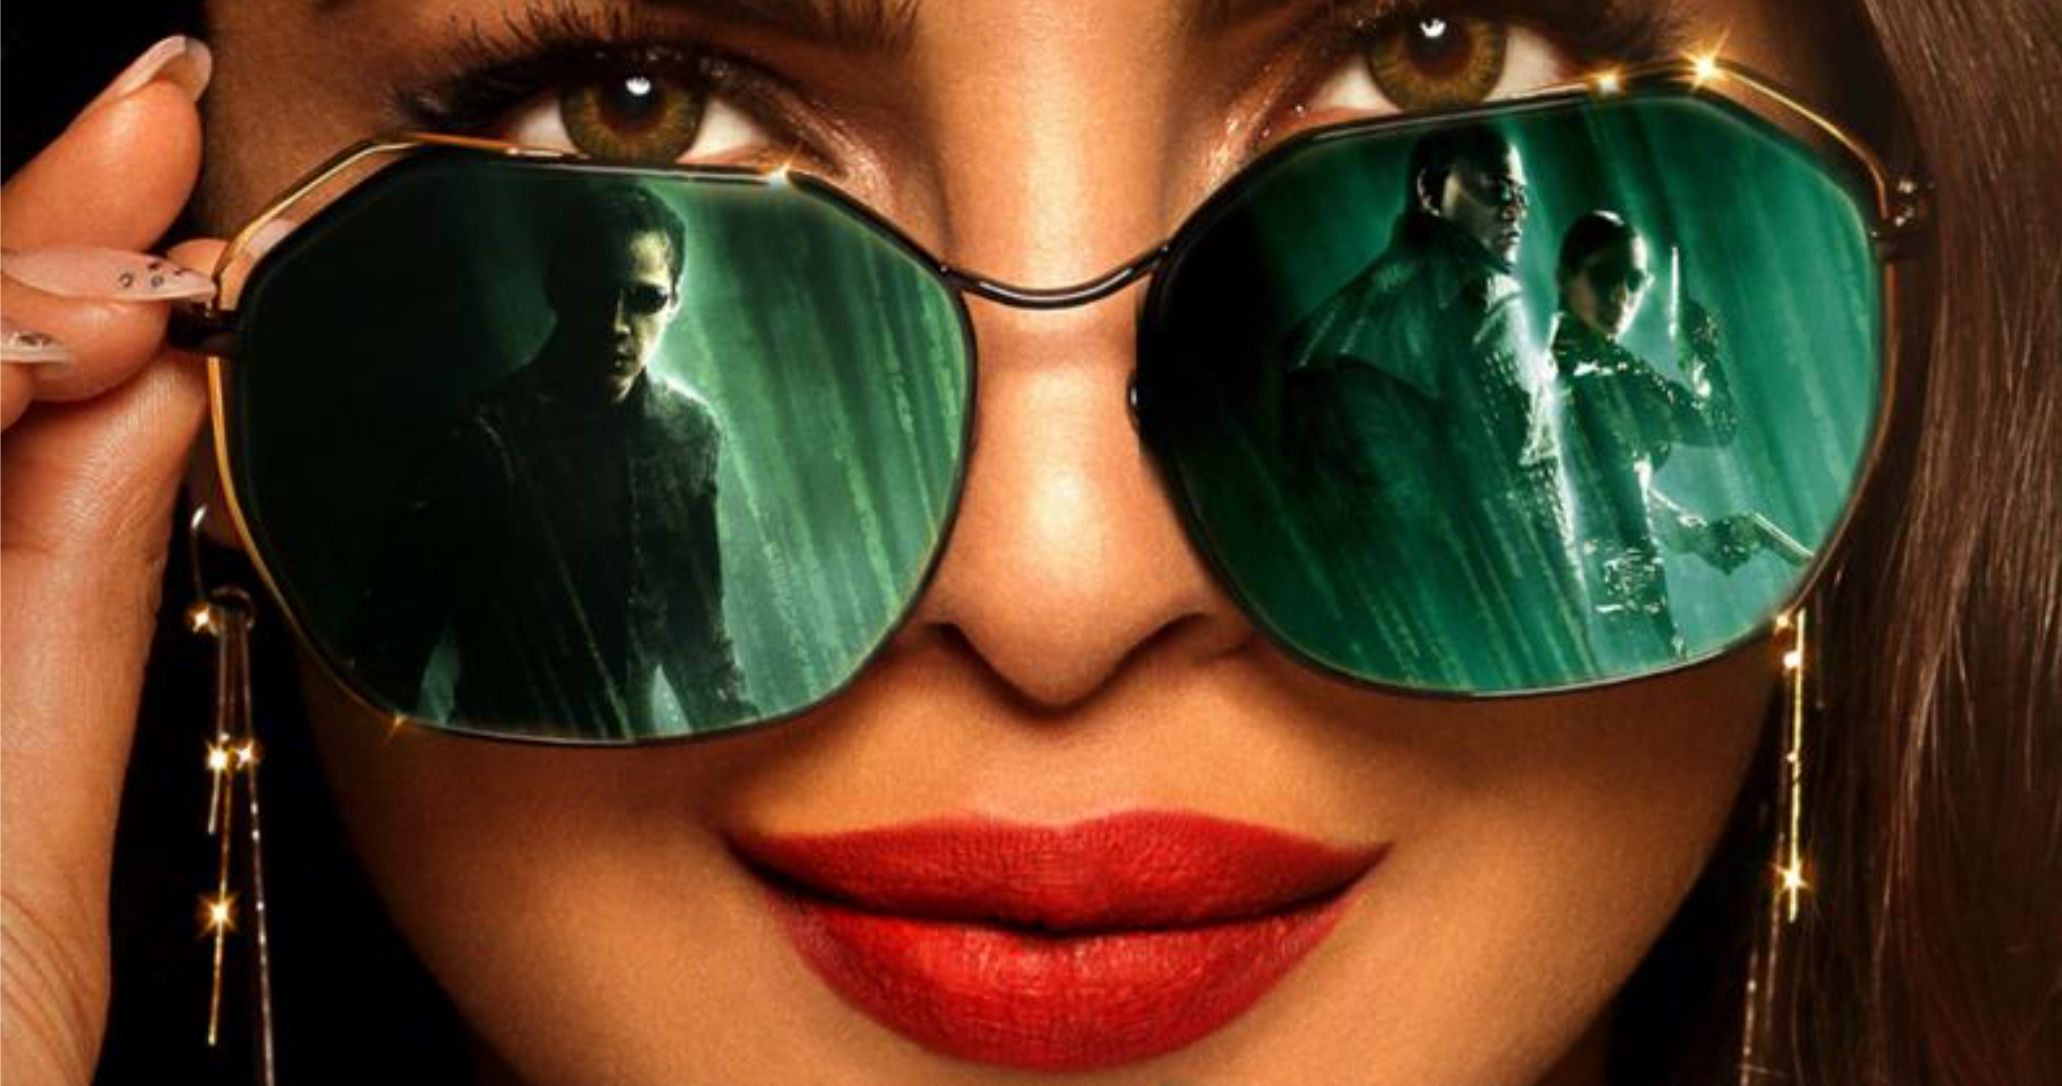 The Matrix 4 Star Priyanka Chopra Teases Surprise Role Fans Don't Expect